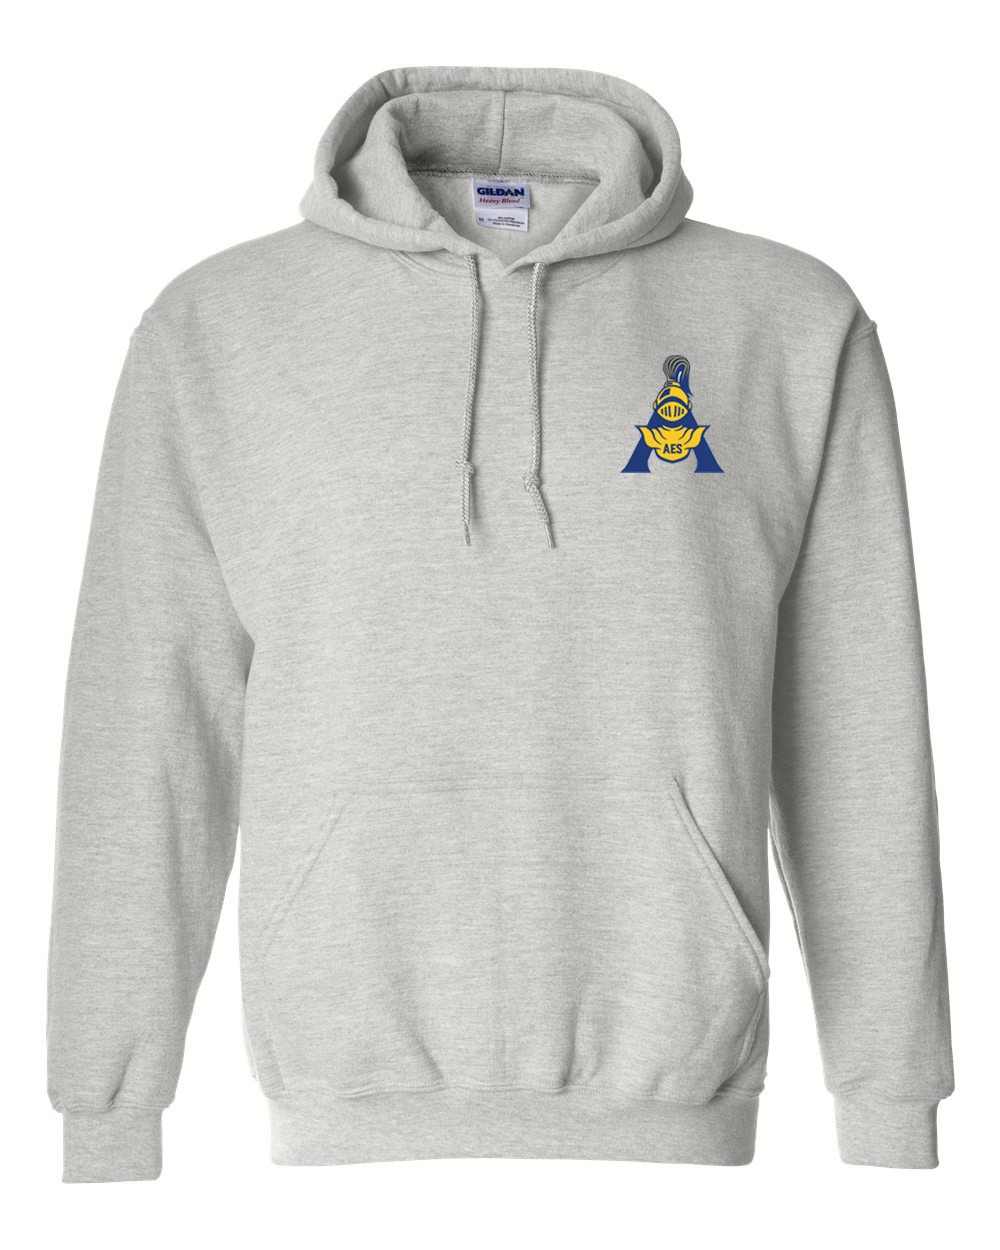 ANN Spirit Pullover Hoodie w/ AES Logo - Please Allow 2-3 Weeks for Delivery